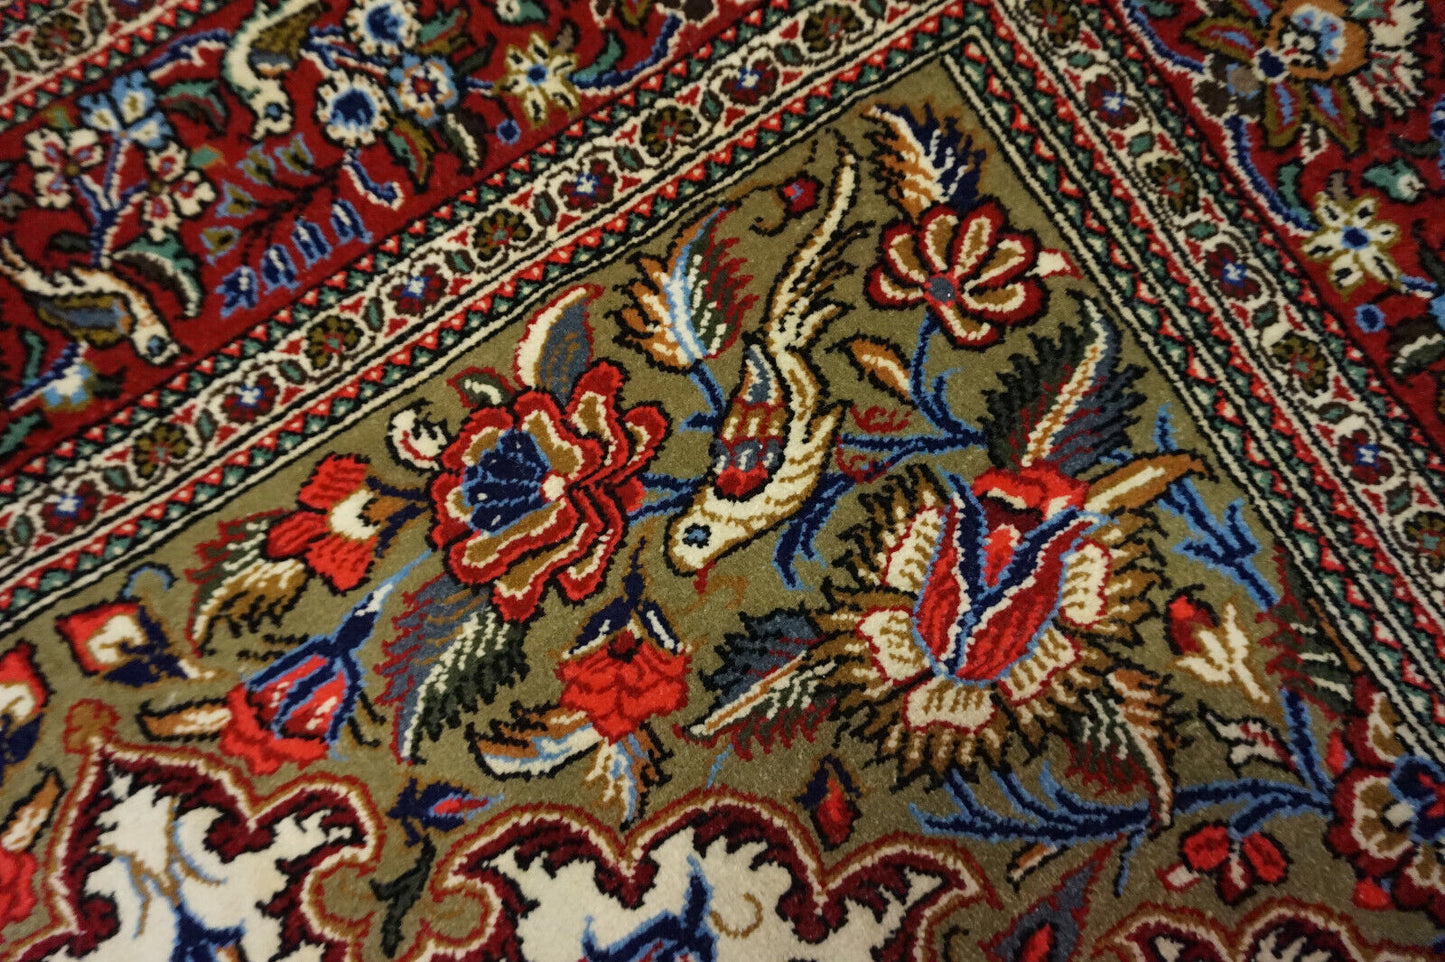 Close-up of joyous bird patterns woven into the Vintage Prayer Rug